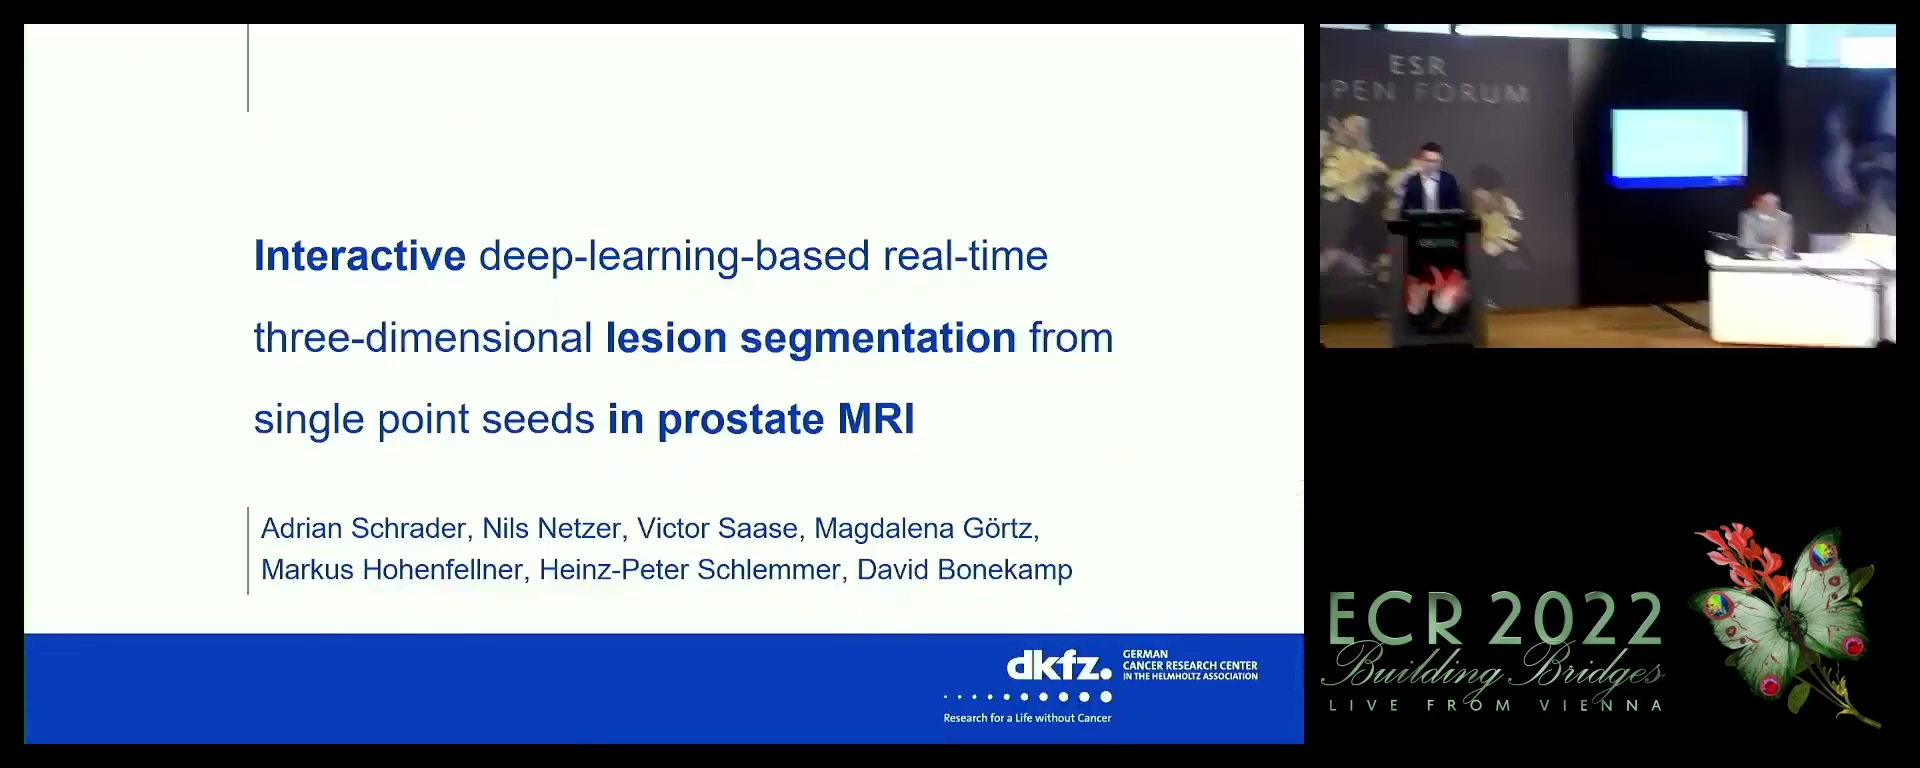 Interactive deep-learning-based real-time three-dimensional lesion segmentation from single point seeds in prostate MRI - Adrian Schrader, Heidelberg / DE